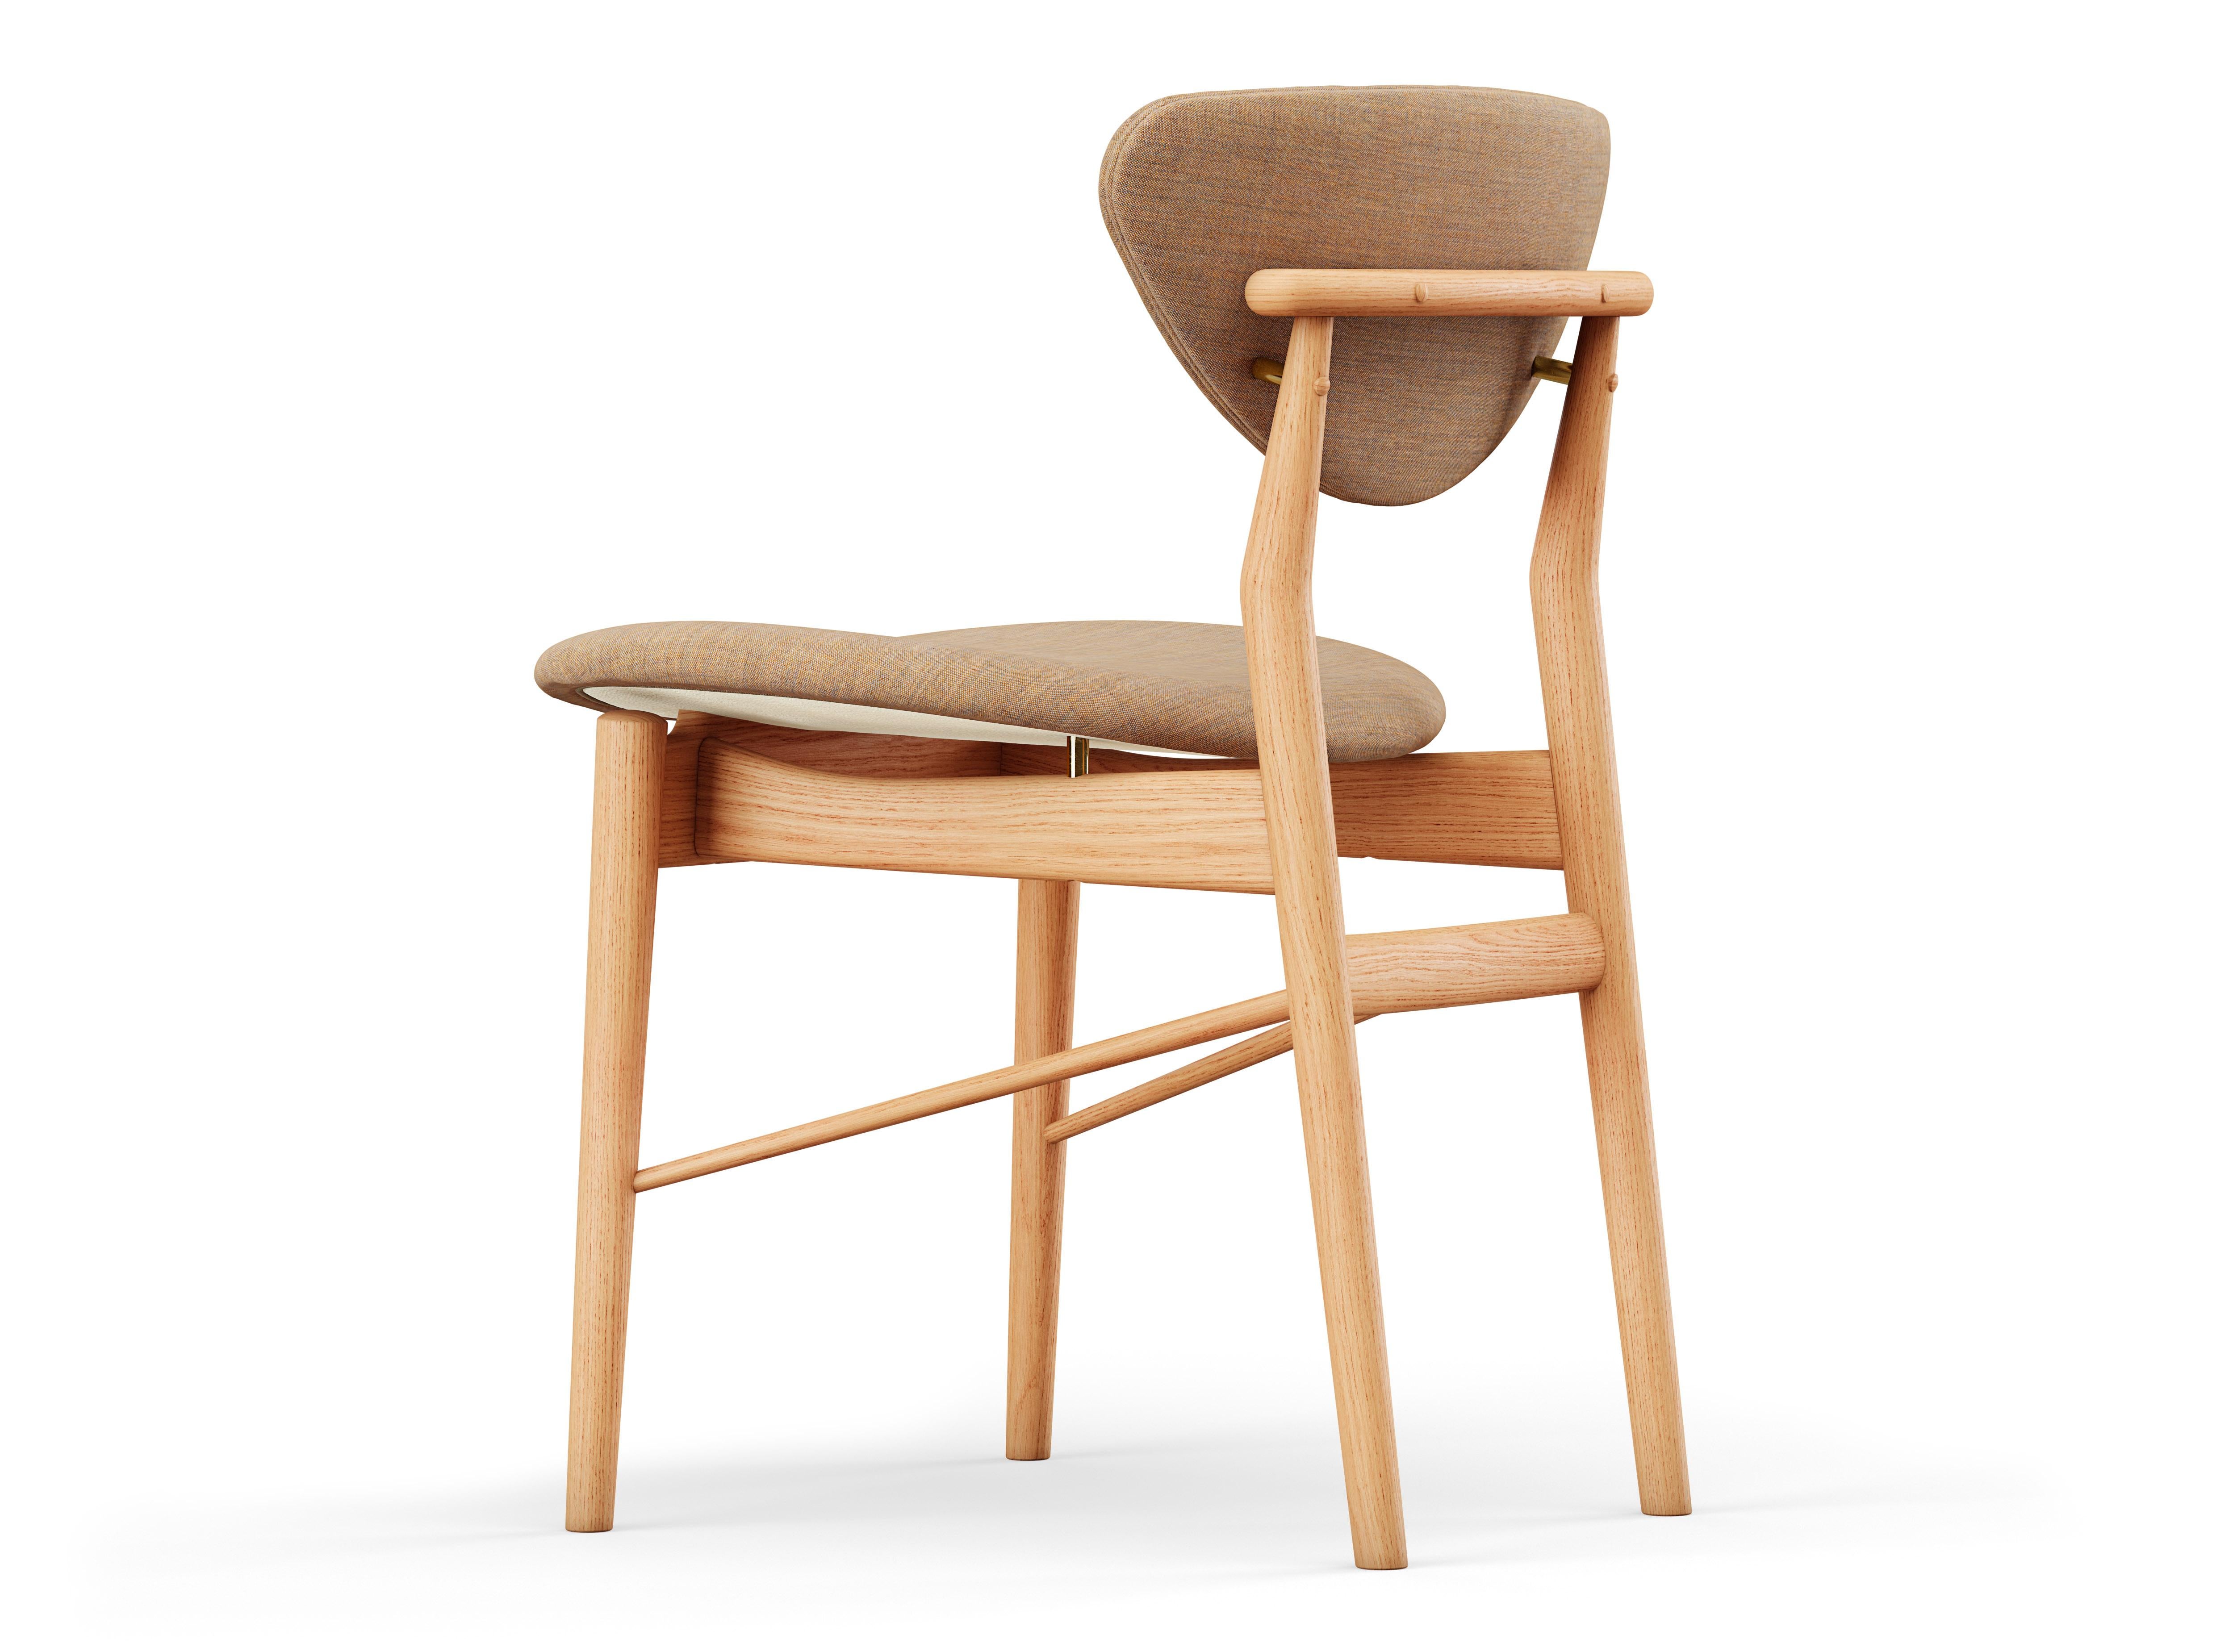 Chair designed by Finn Juhl in 1946, relaunched in 208.
Manufactured by House of Finn Juhl in Denmark.

To this day, Finn Juhl's designs are unconventional and defy expectations with subtle details. Finn Juhl himself once said that the deviation